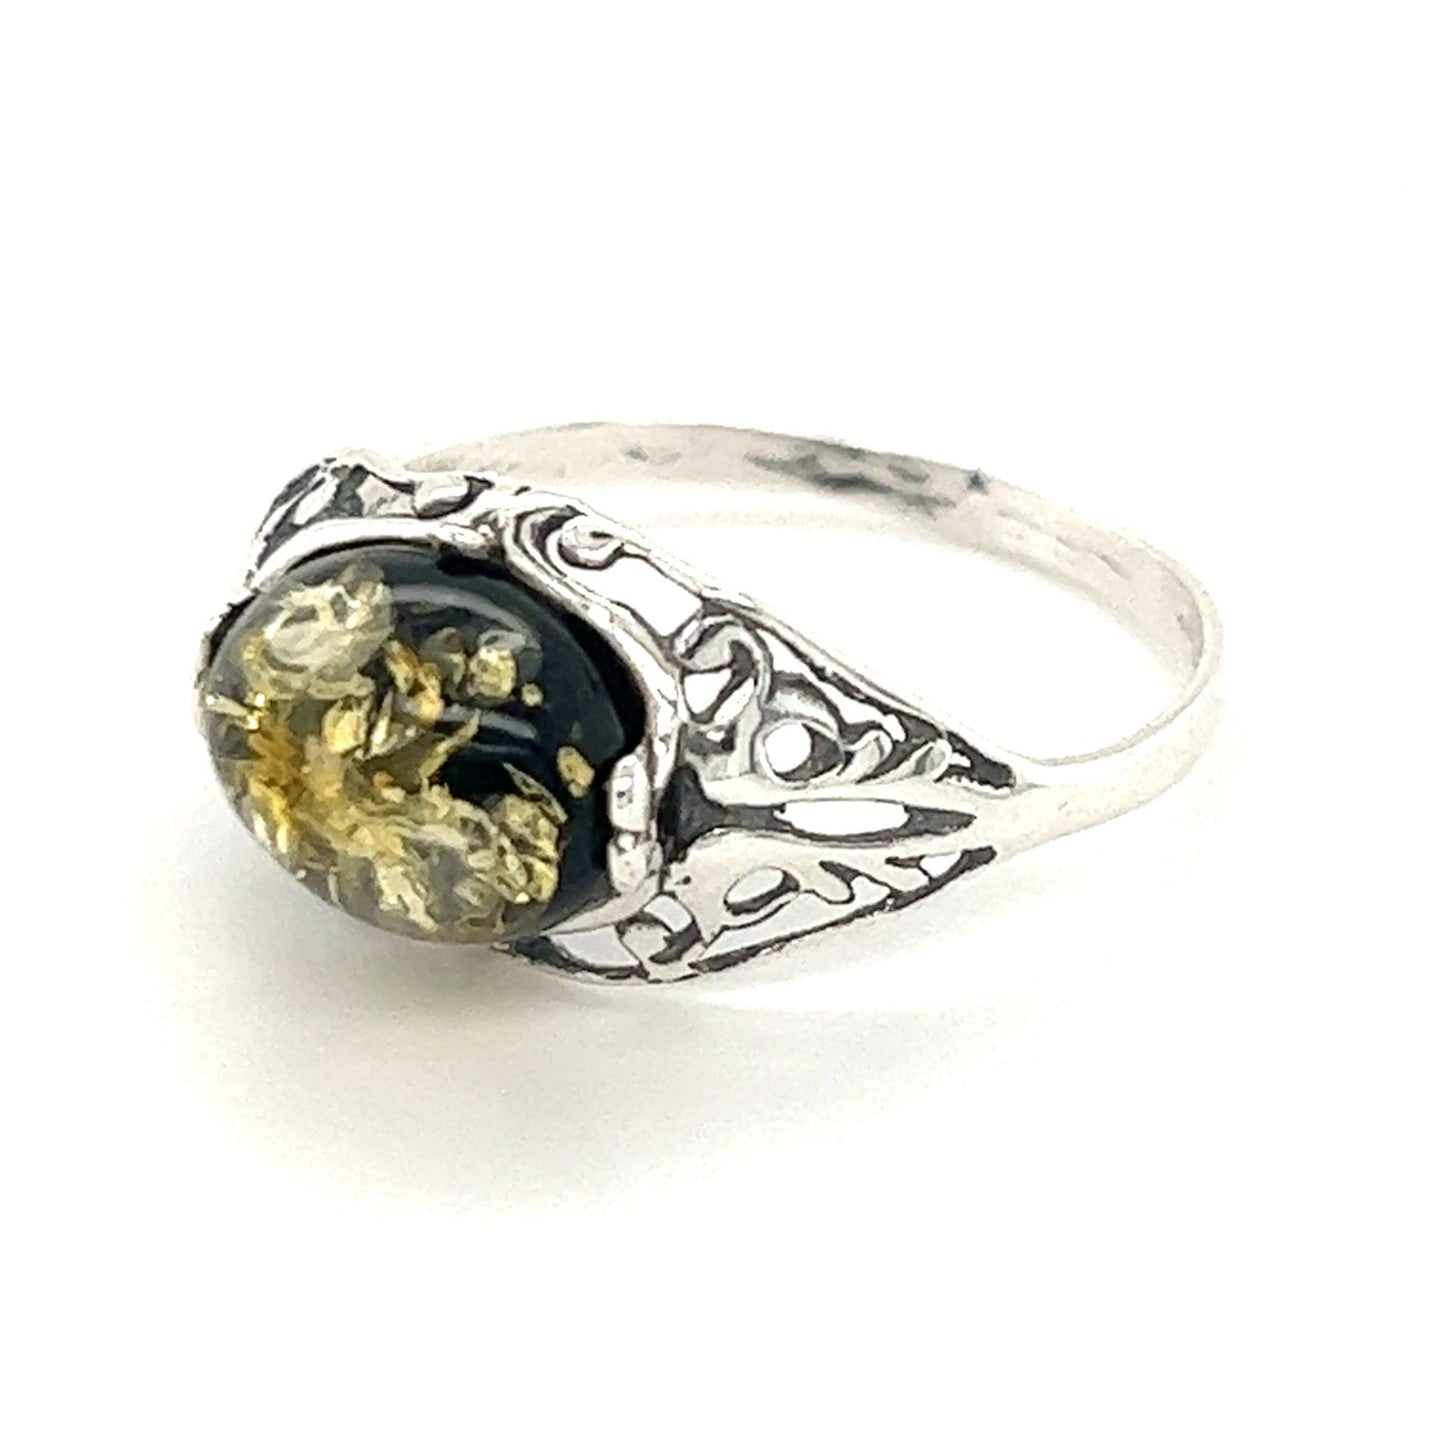 A Glowing Green Baltic Amber Ring with a black and Baltic amber stone by Super Silver.